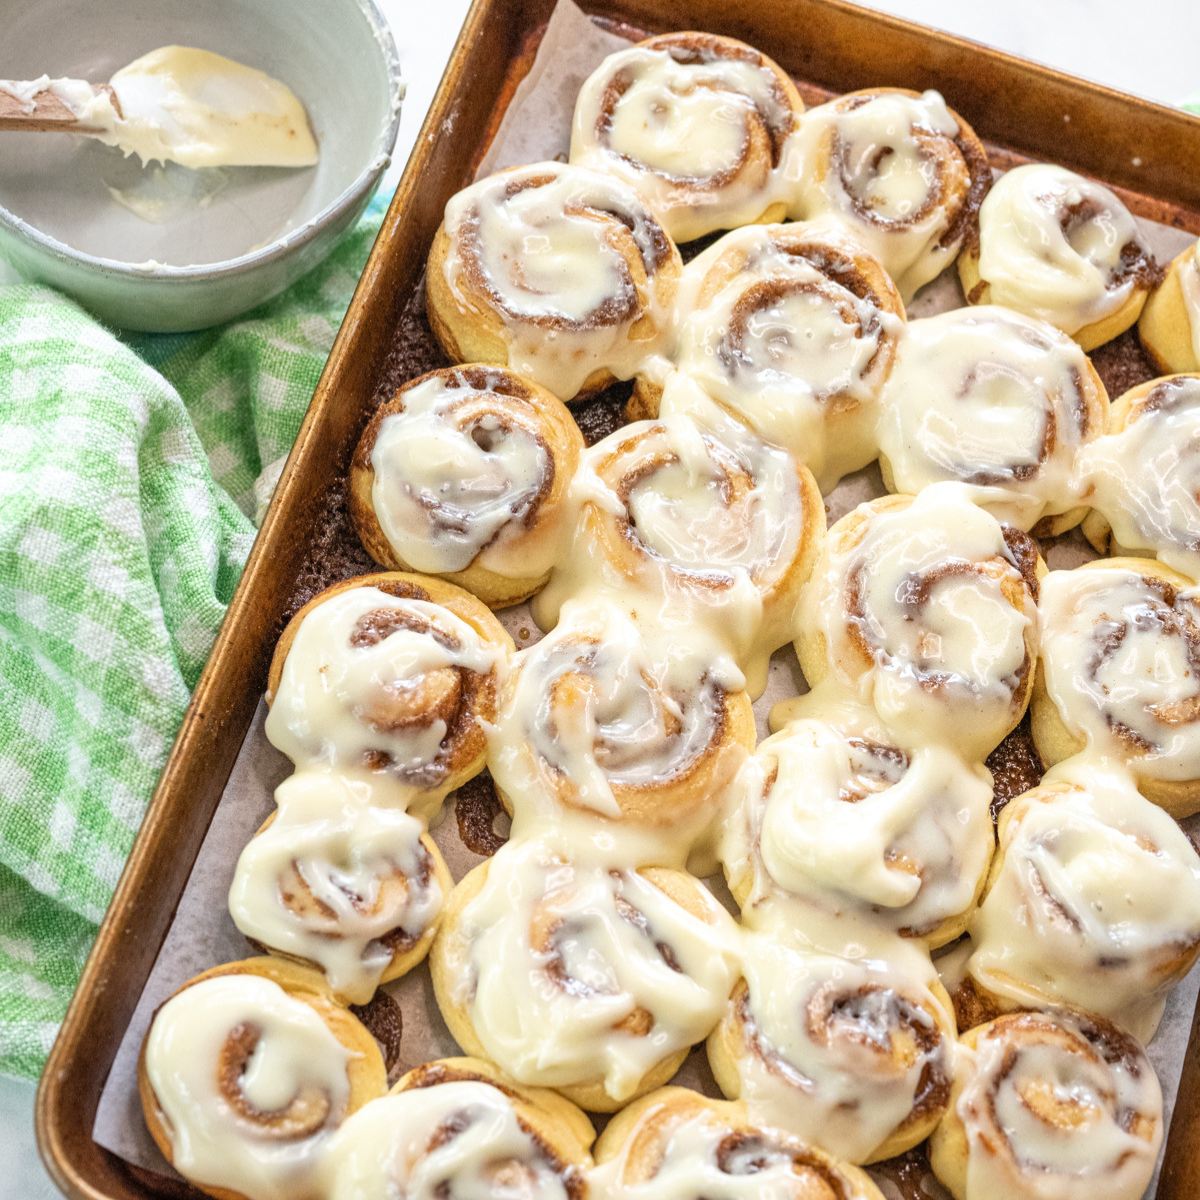 A pan filled with mini cinnamon rolls slathered with a cream cheese frosting.